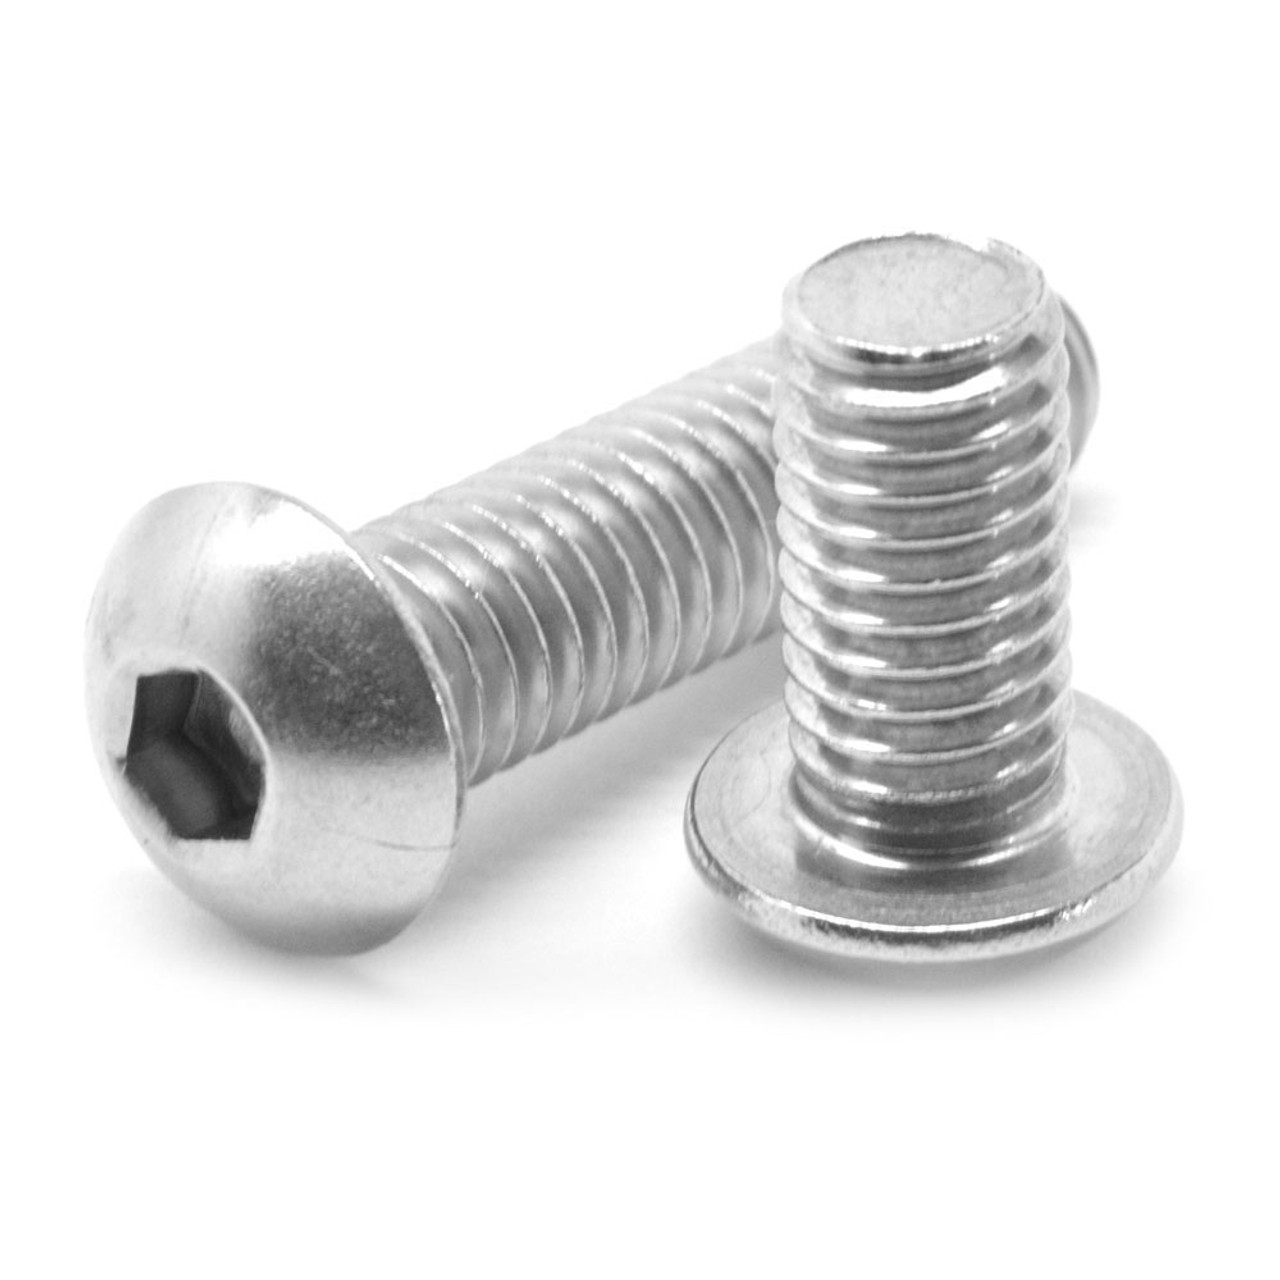 M12 x 1.75 x 35 MM (FT) Coarse Thread ISO 7380 Socket Button Head Cap Screw Stainless Steel 18-8